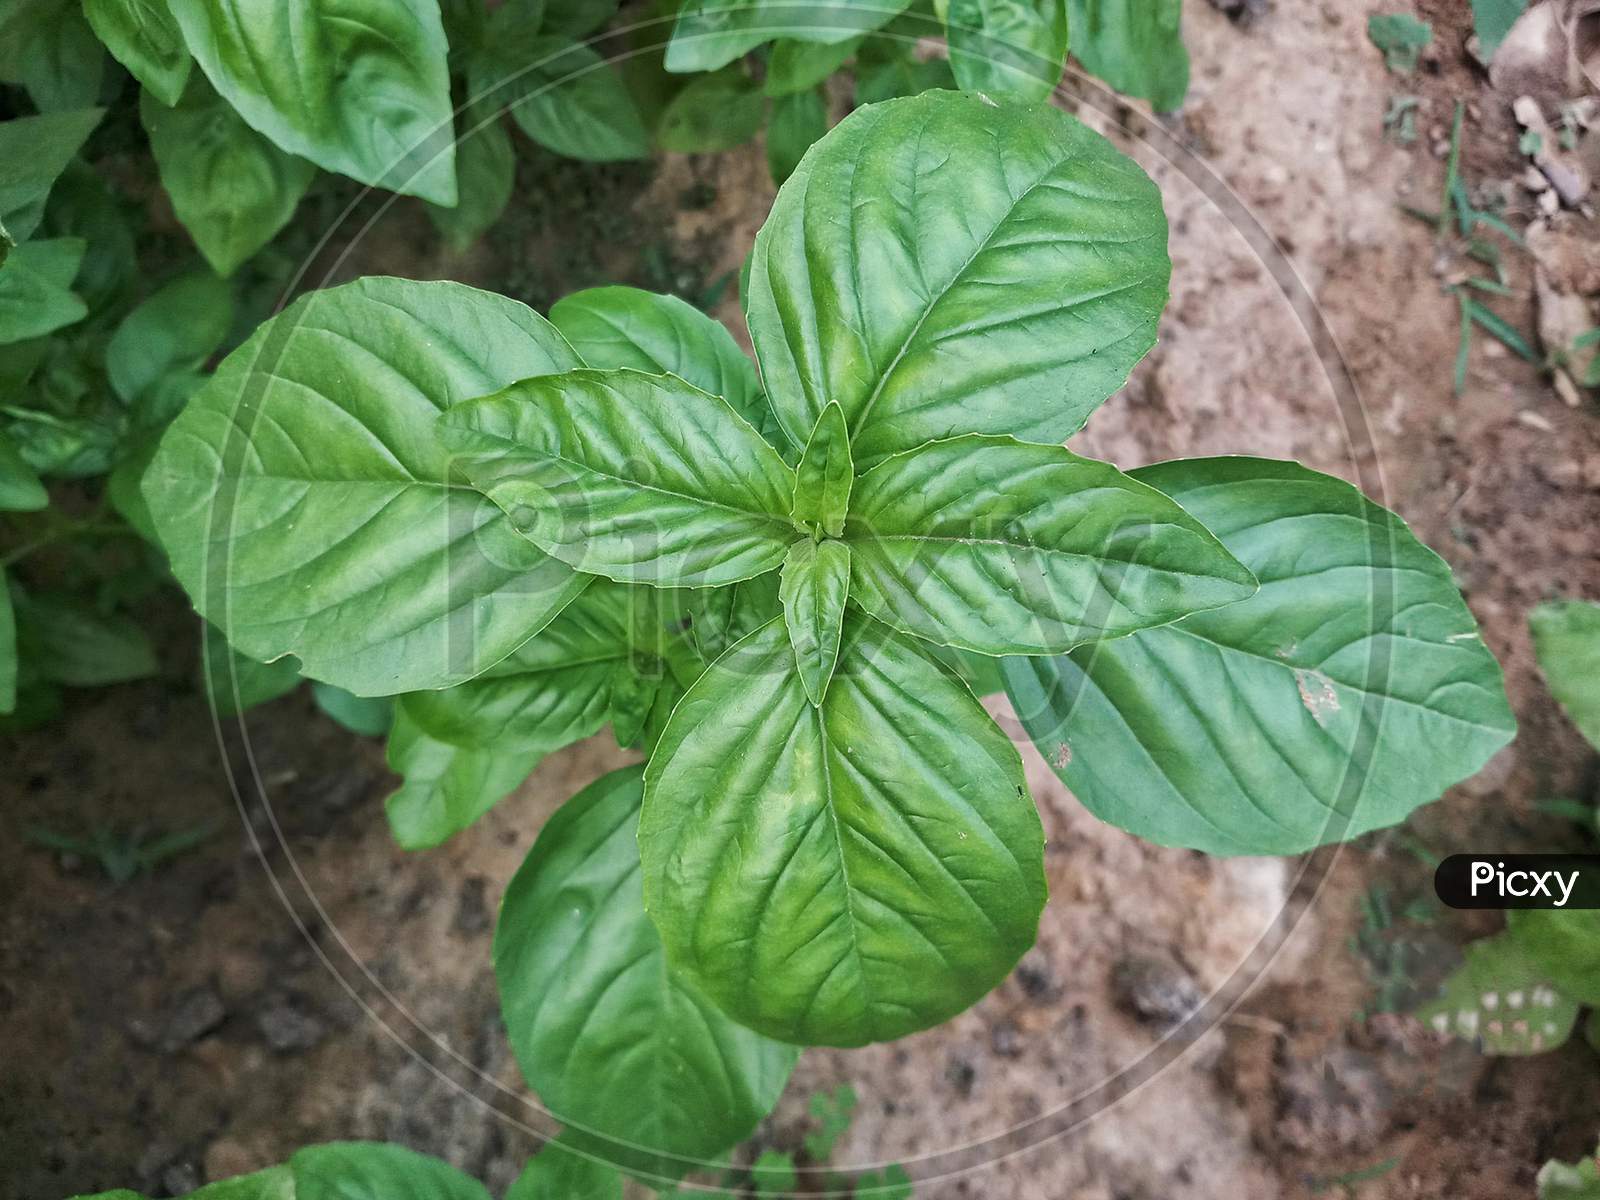 Sweet Basil Is The Most Popular And Widely Used Culinary Herb